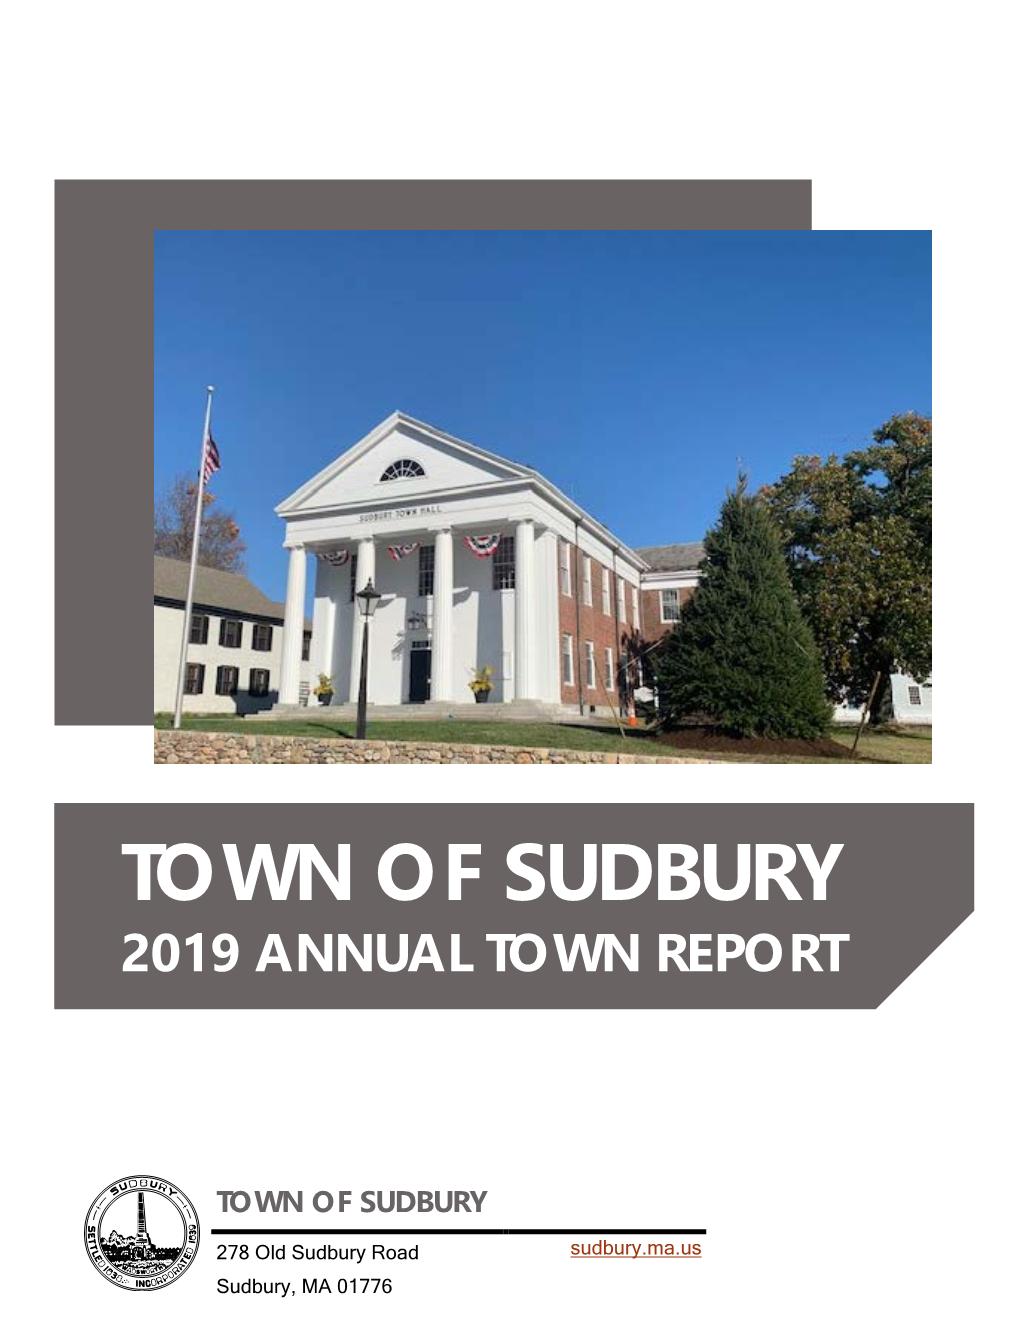 3 Sudbury Town Offices/Departments